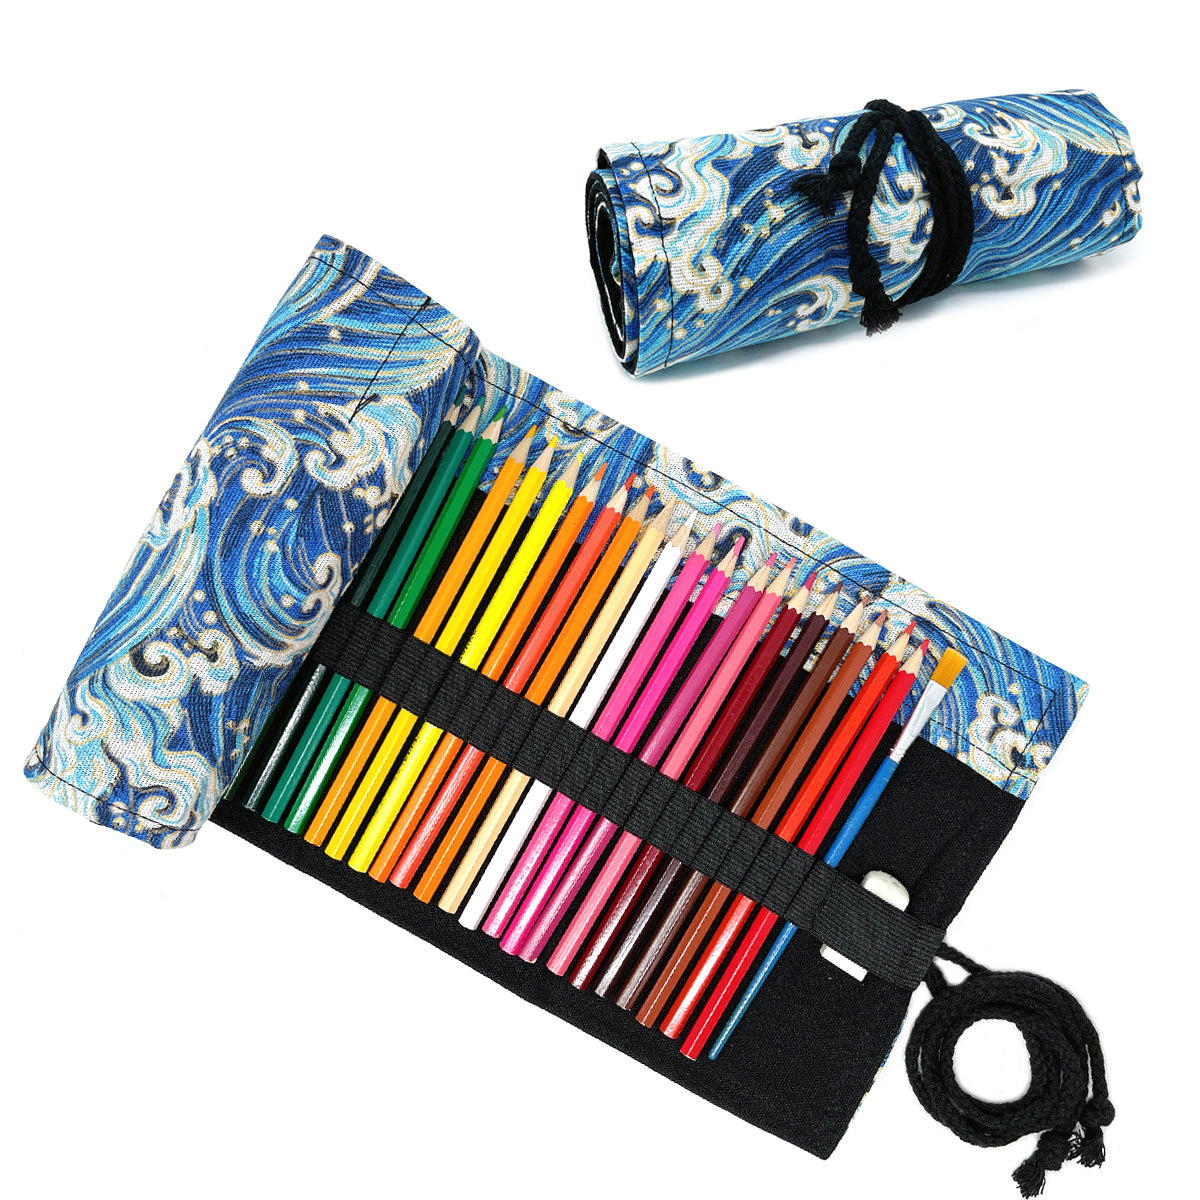 Heldig Pencil Roll Wrap,Drawing Coloring Canvas Pencil Roll 36/48/72 Slots  Artist Pencil Wrap (Pencils are NOT Included) Pencils Pouch Case Canvas